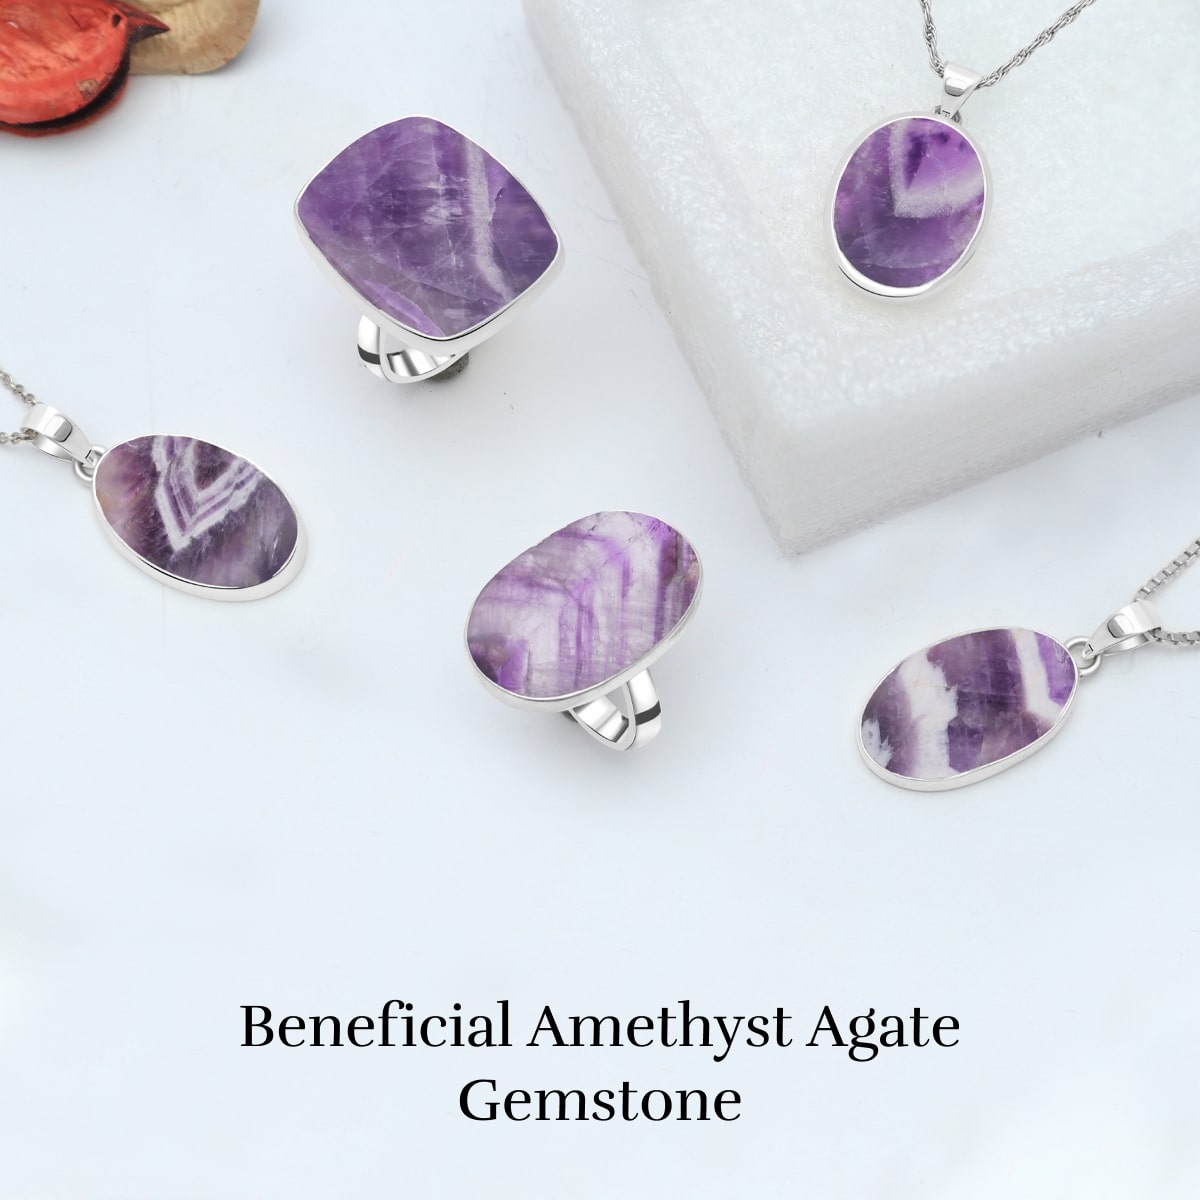 Benefits of Amethyst Lace Agate Stone